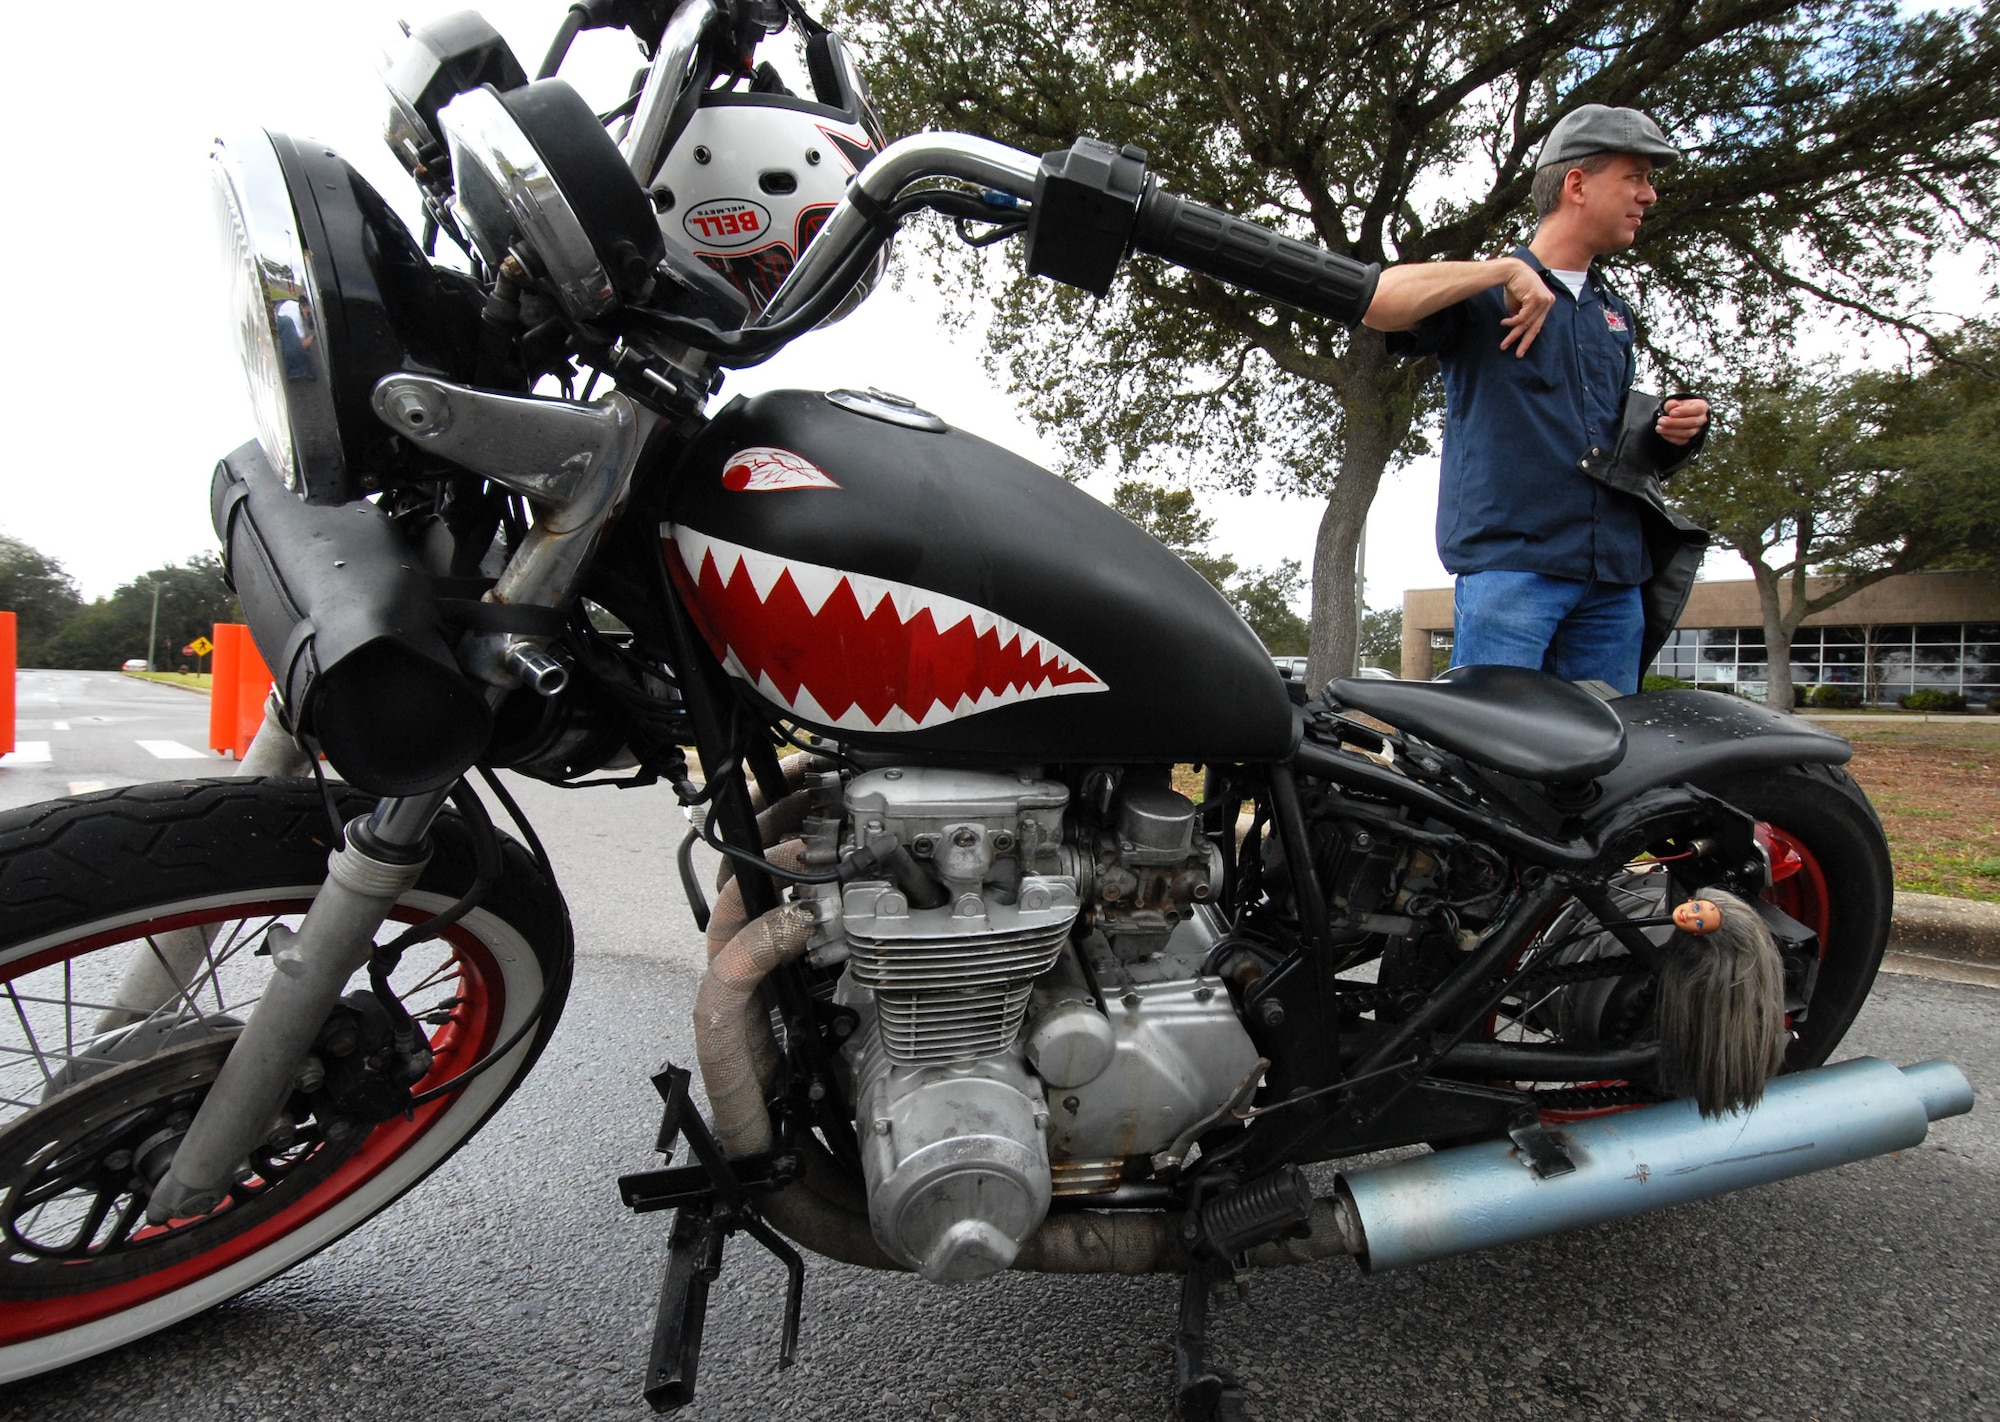 Tech. Sgt. Mike Massey, 96th Aerospace Medical Squadron, waits with his custom bike for the group ride to begin March 12 at Team Eglin's third annual Motorcycle Safety Day.  Despite threatening skies, the event brought out approximately 220 riders to participate in safety discussions, riding skills competition and group ride.  The safety day came at a critical time for Eglin with spring break approaching and a recent active-duty death involving a motorcycle. (U.S. Air Force photo/Samuel King Jr.)